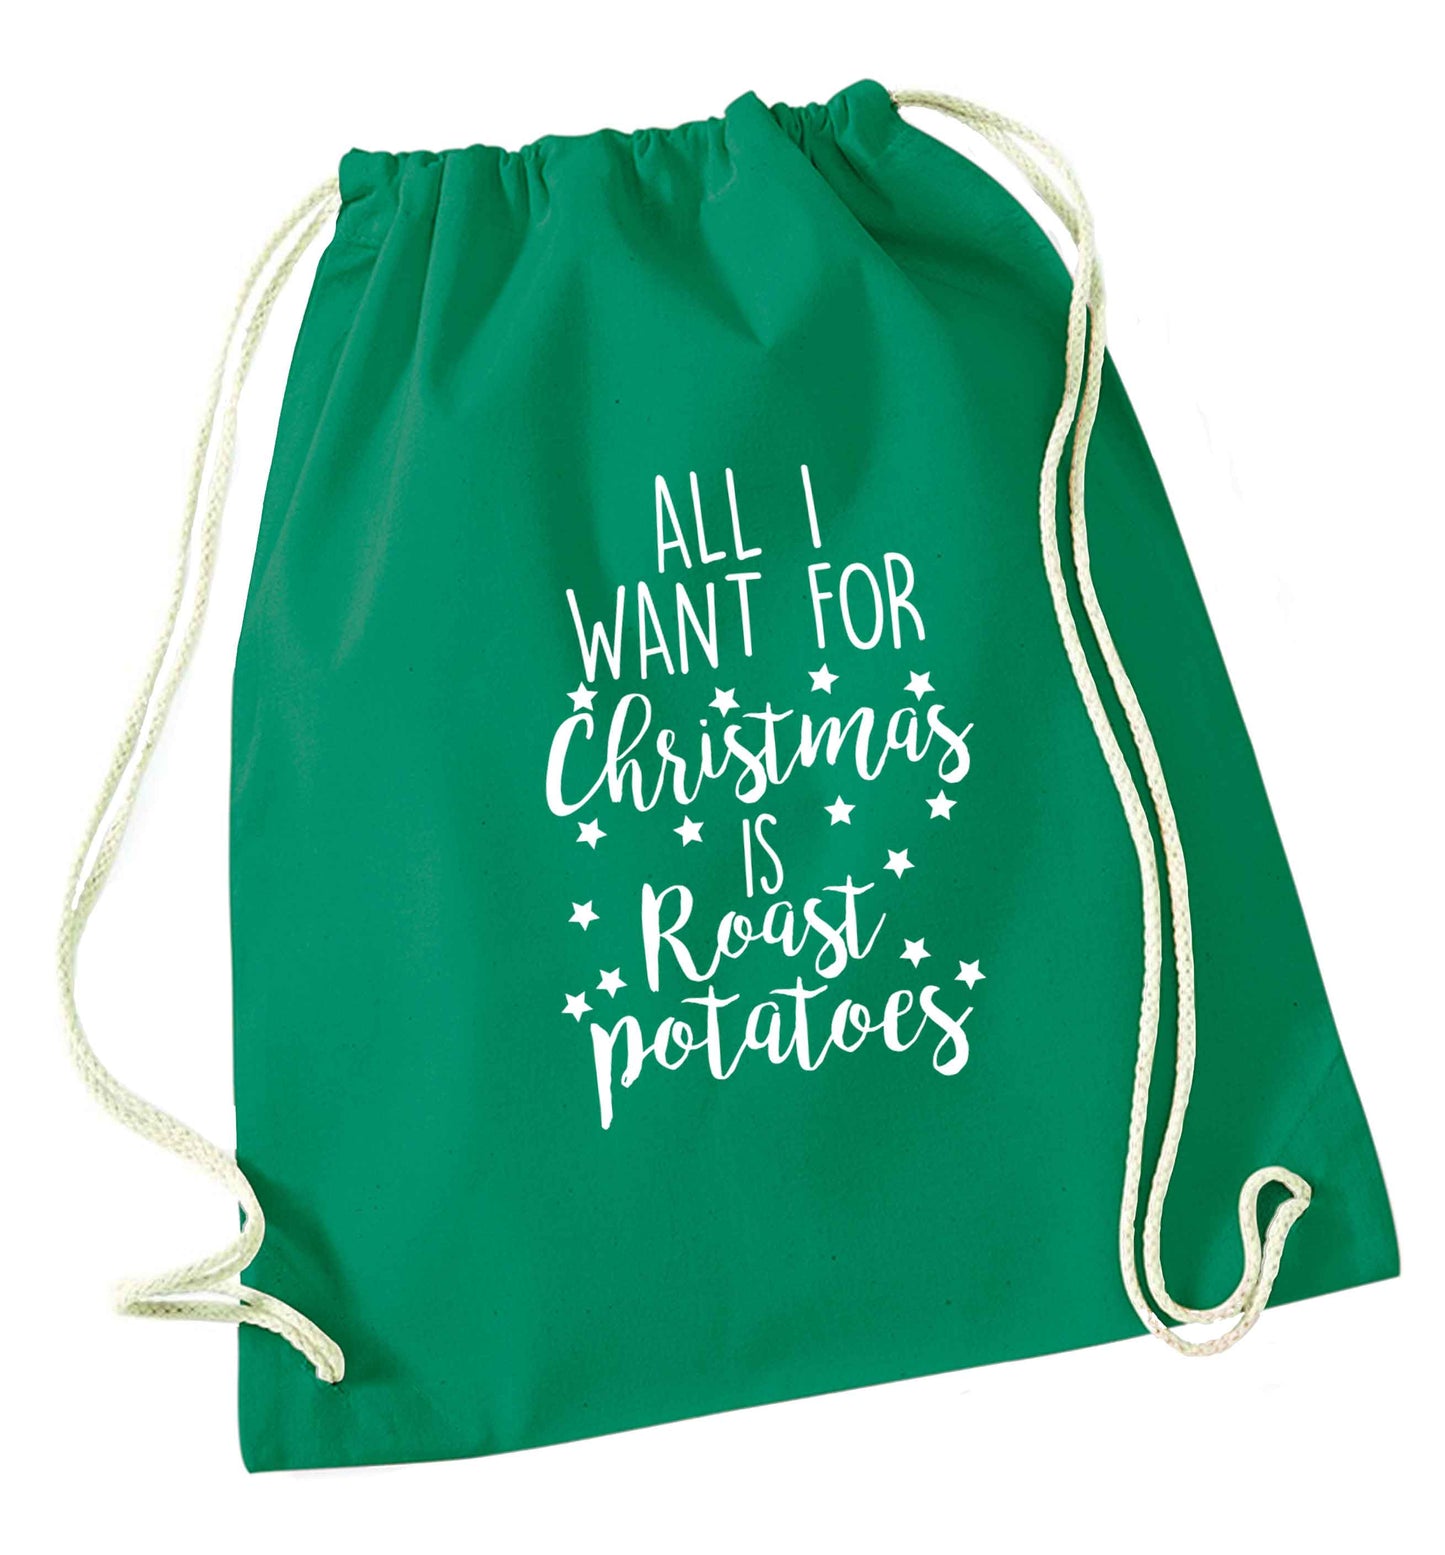 All I want for Christmas is roast potatoes green drawstring bag